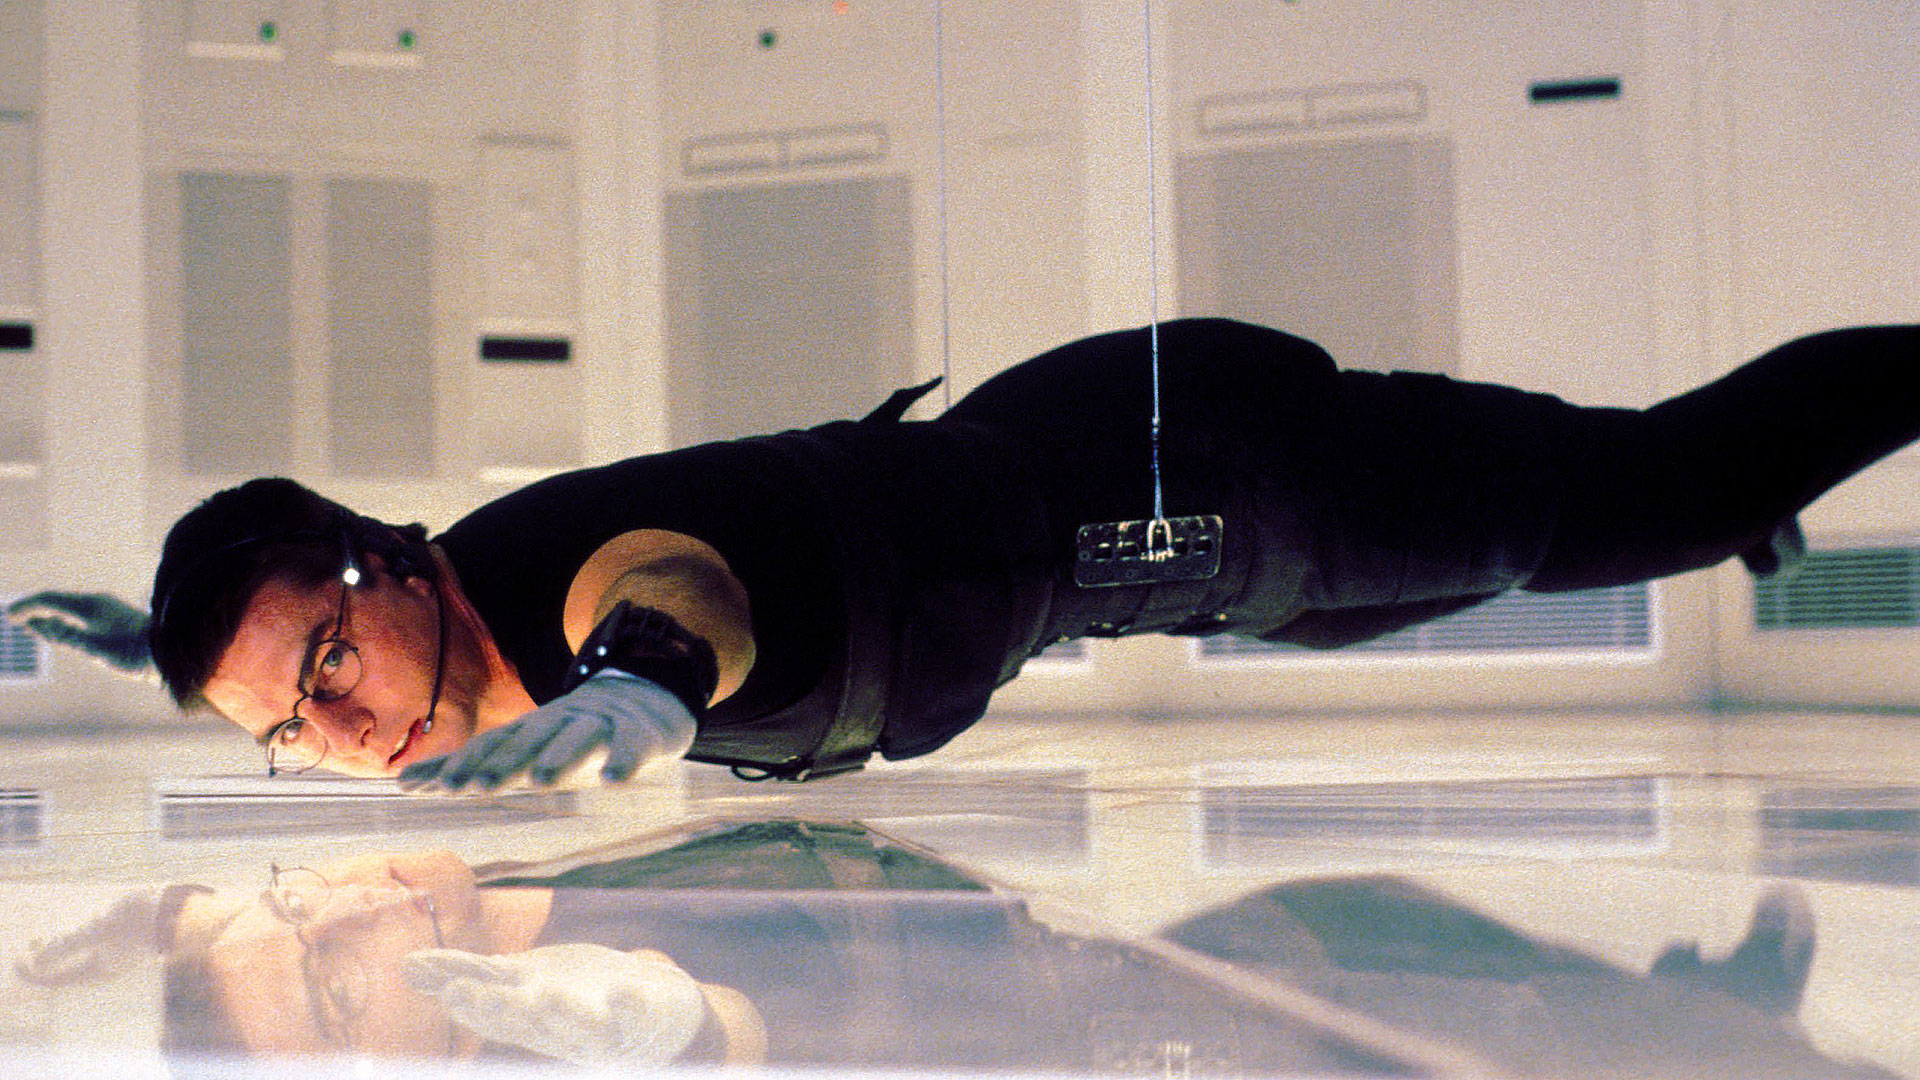 Mission: Impossible HD Wallpaper